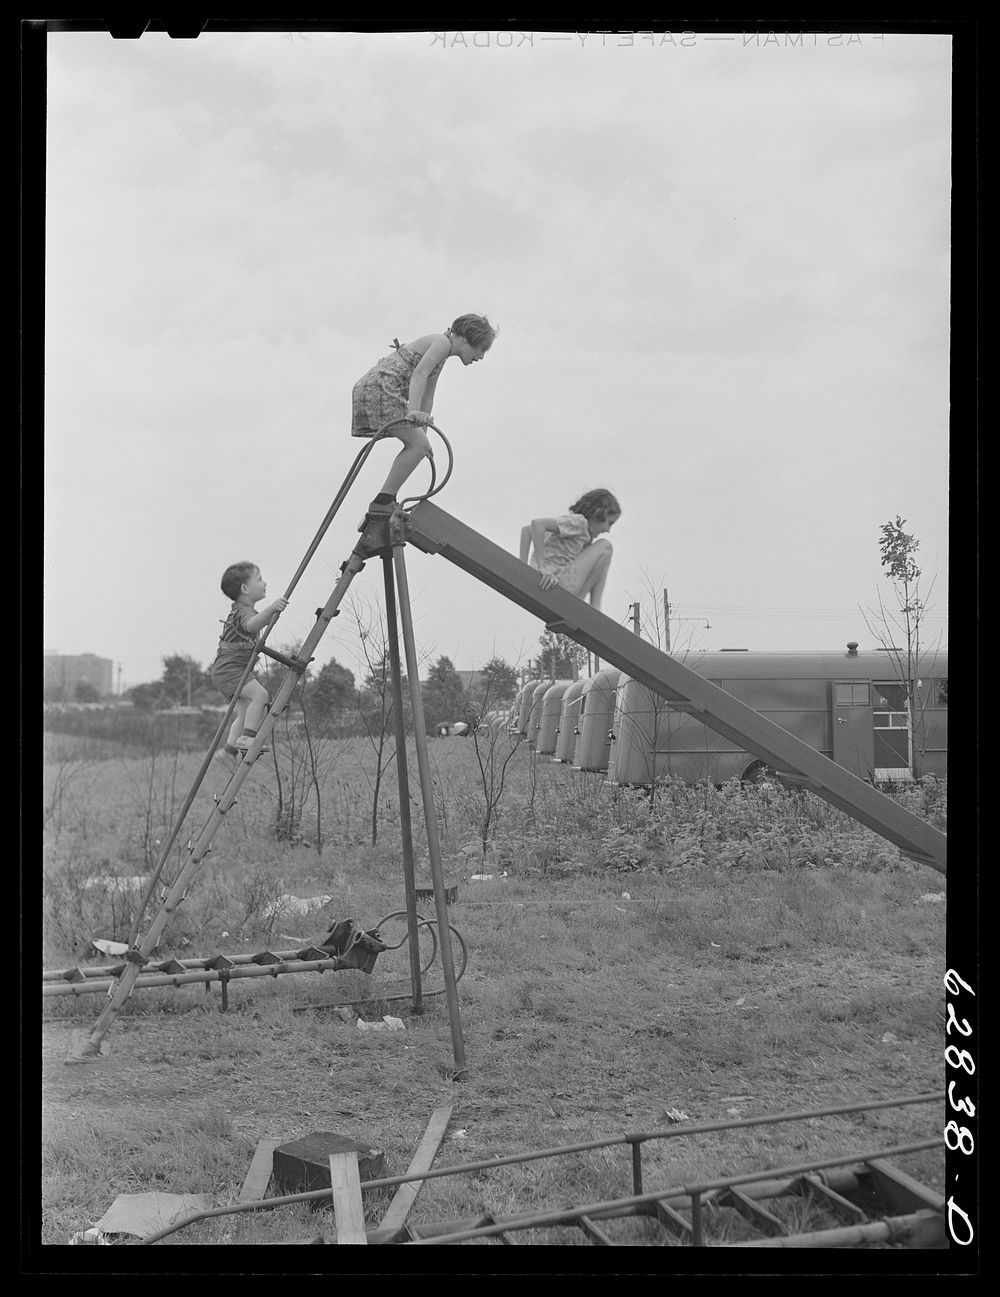 Playground at FSA (Farm Security Administration) trailer camp. Erie, Pennsylvania. Sourced from the Library of Congress.